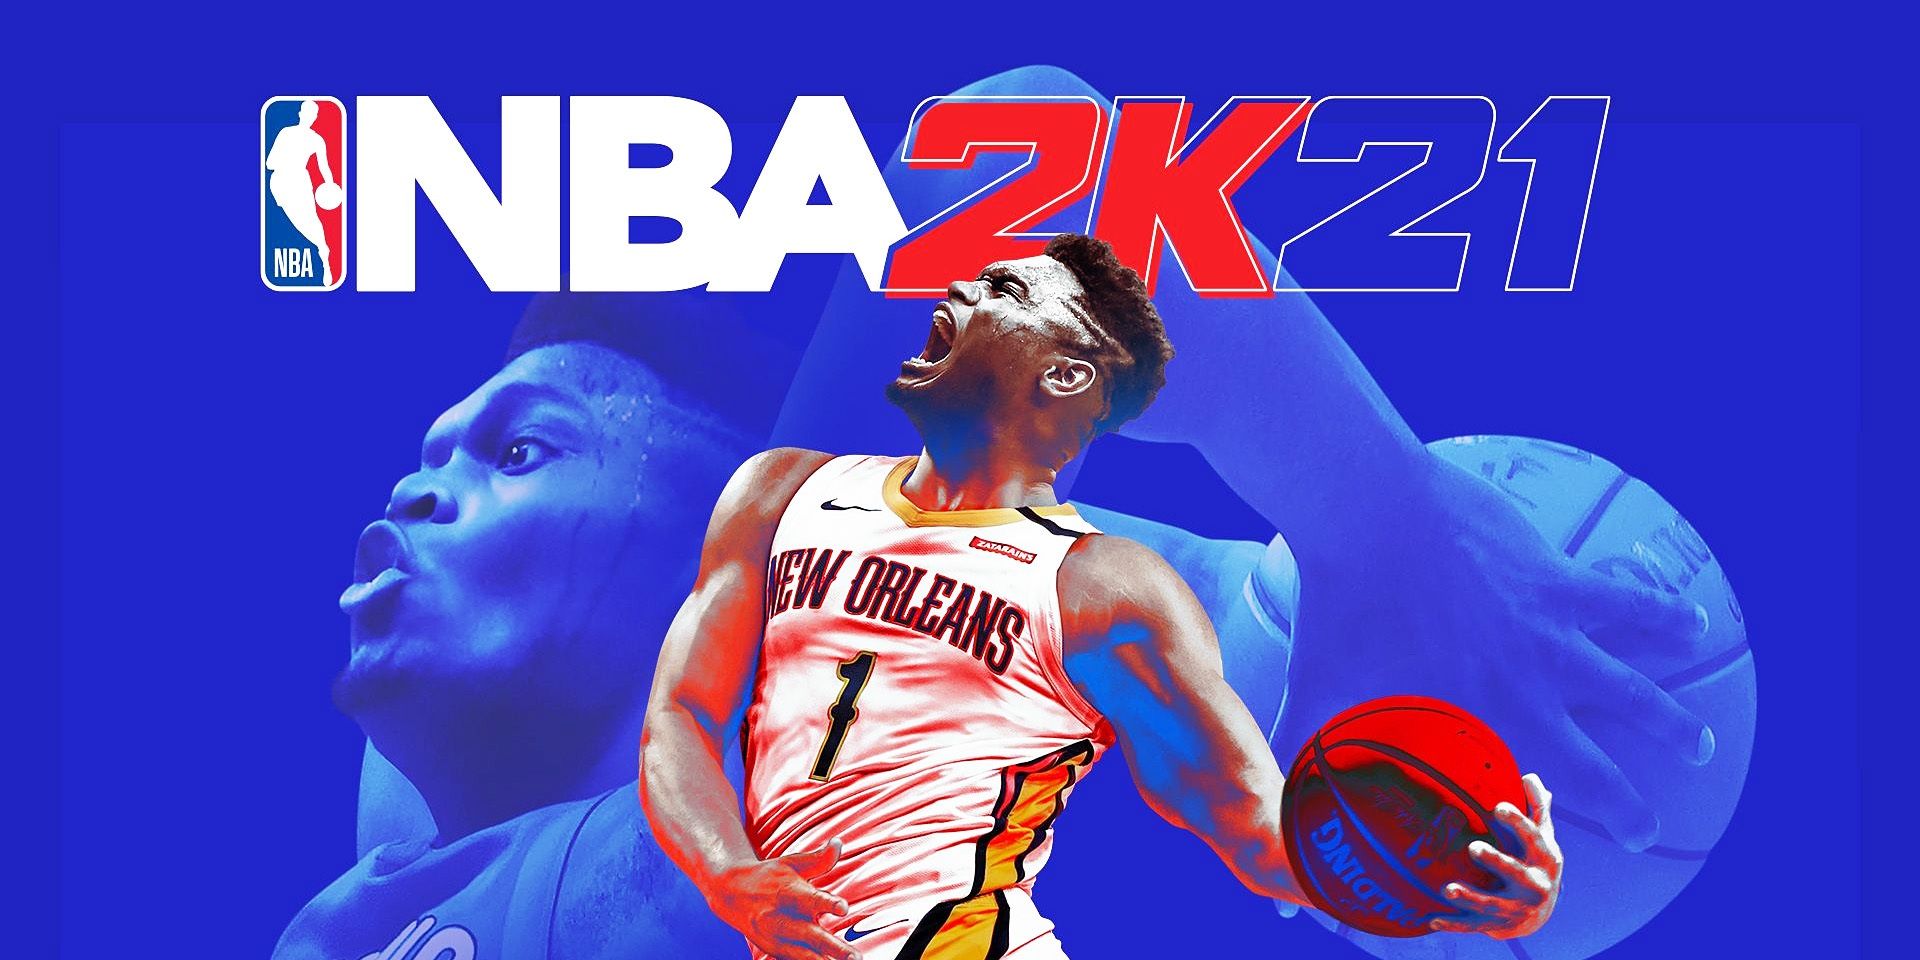 The title screen for the next-gen version of NBA 2K21.